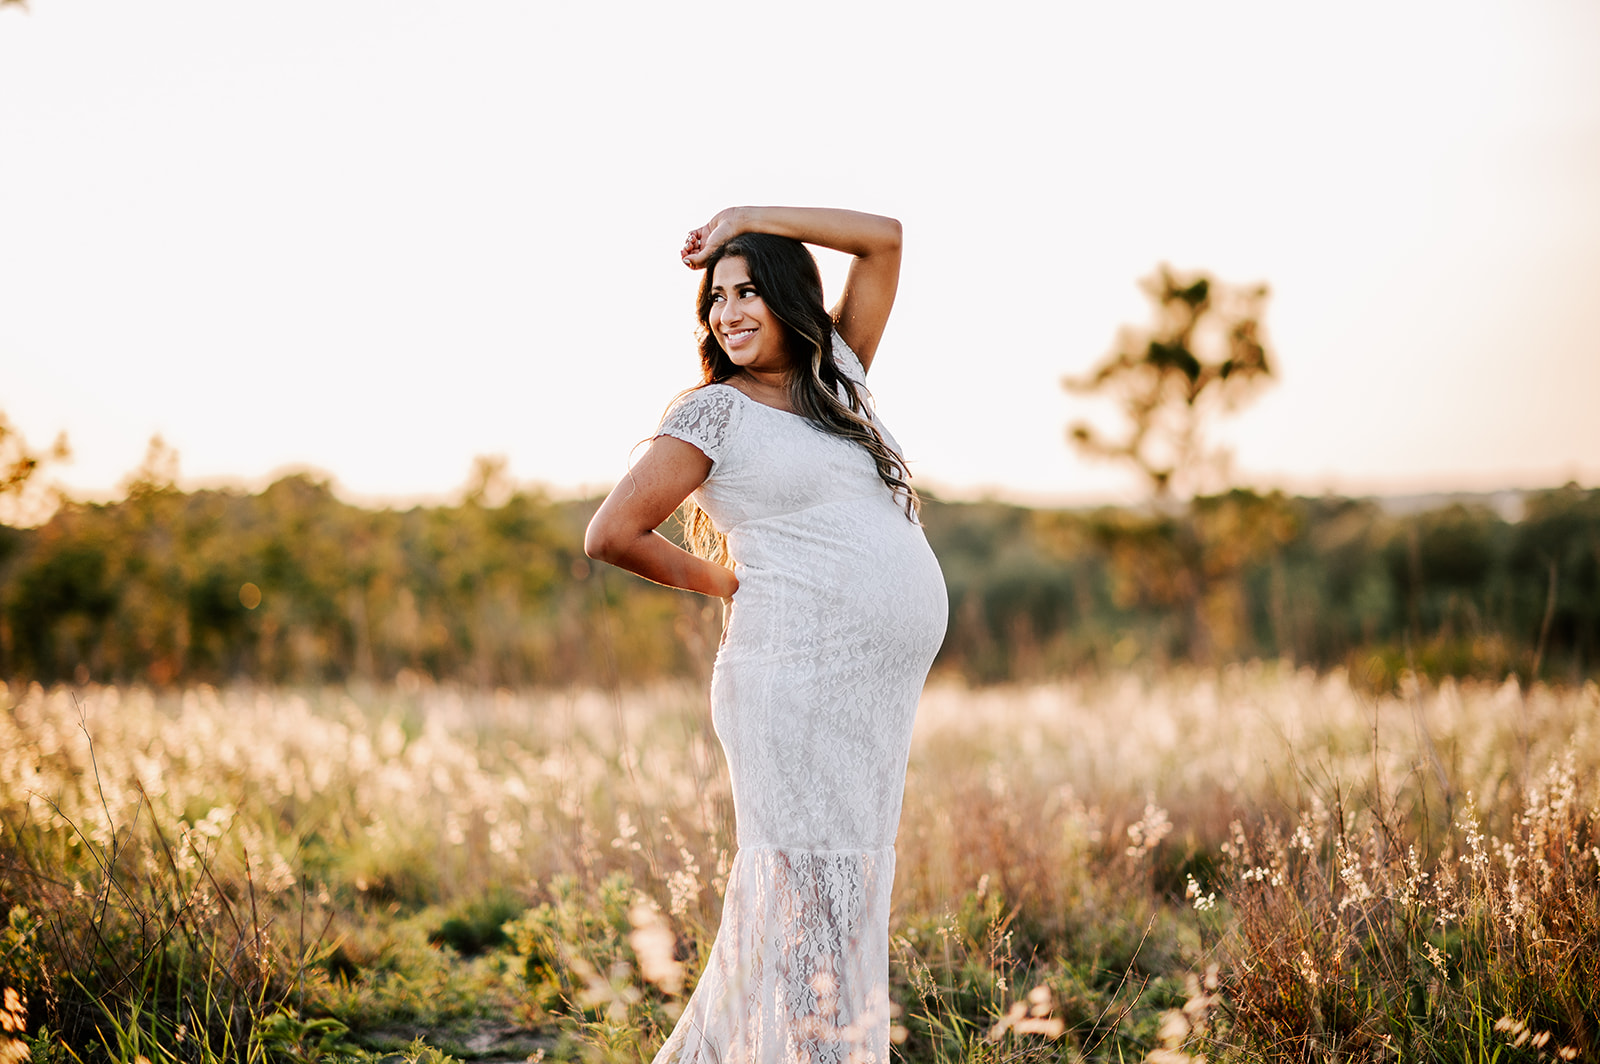 A mother to be in a white lace maternity gown stands in a field of tall golden grass with an arm resting on her head